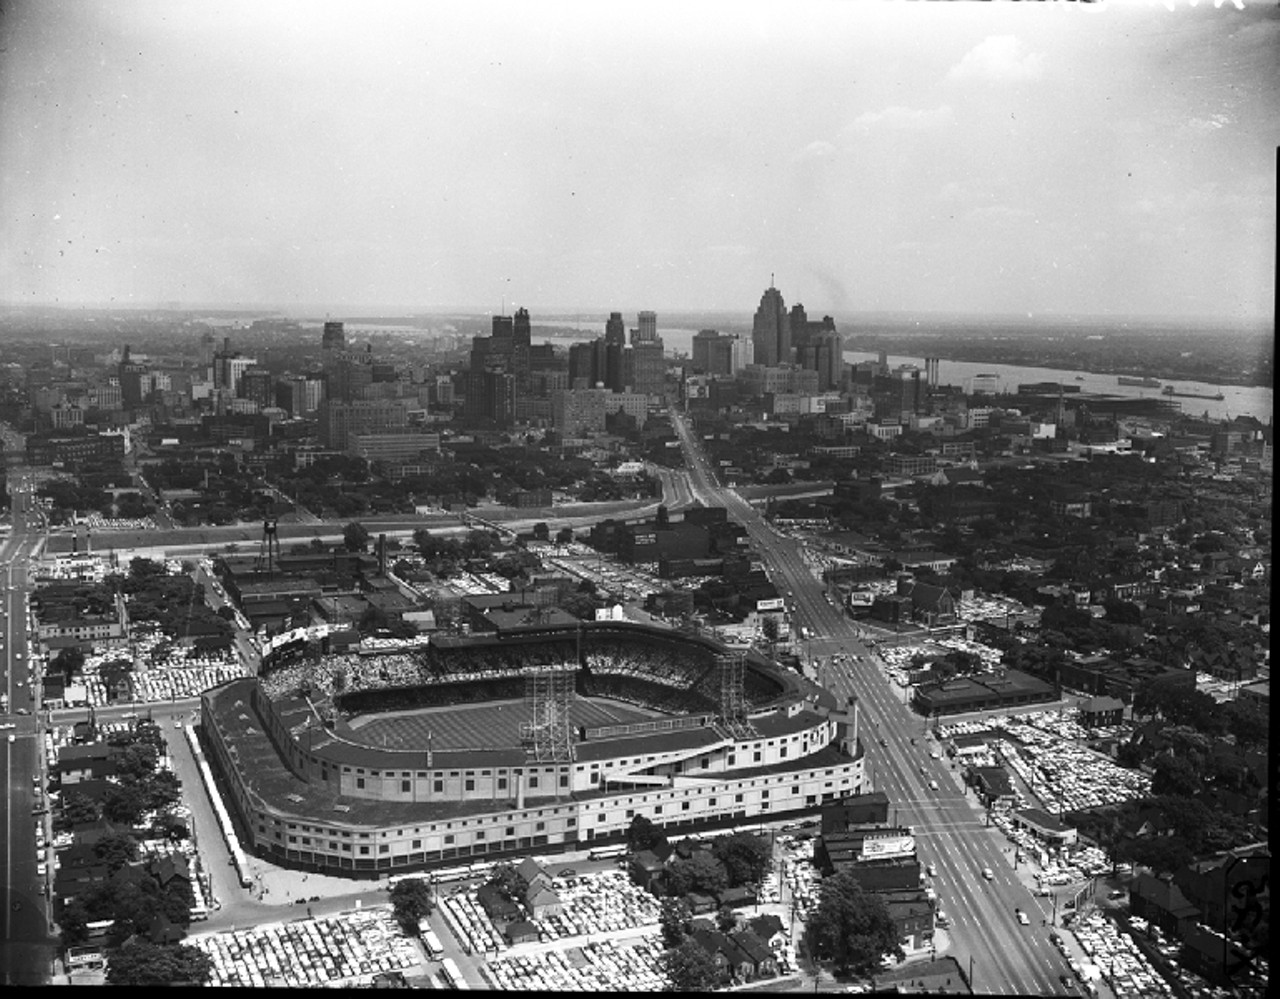 Aerial view of Briggs Stadium and the Detroit skyline, 1950s.